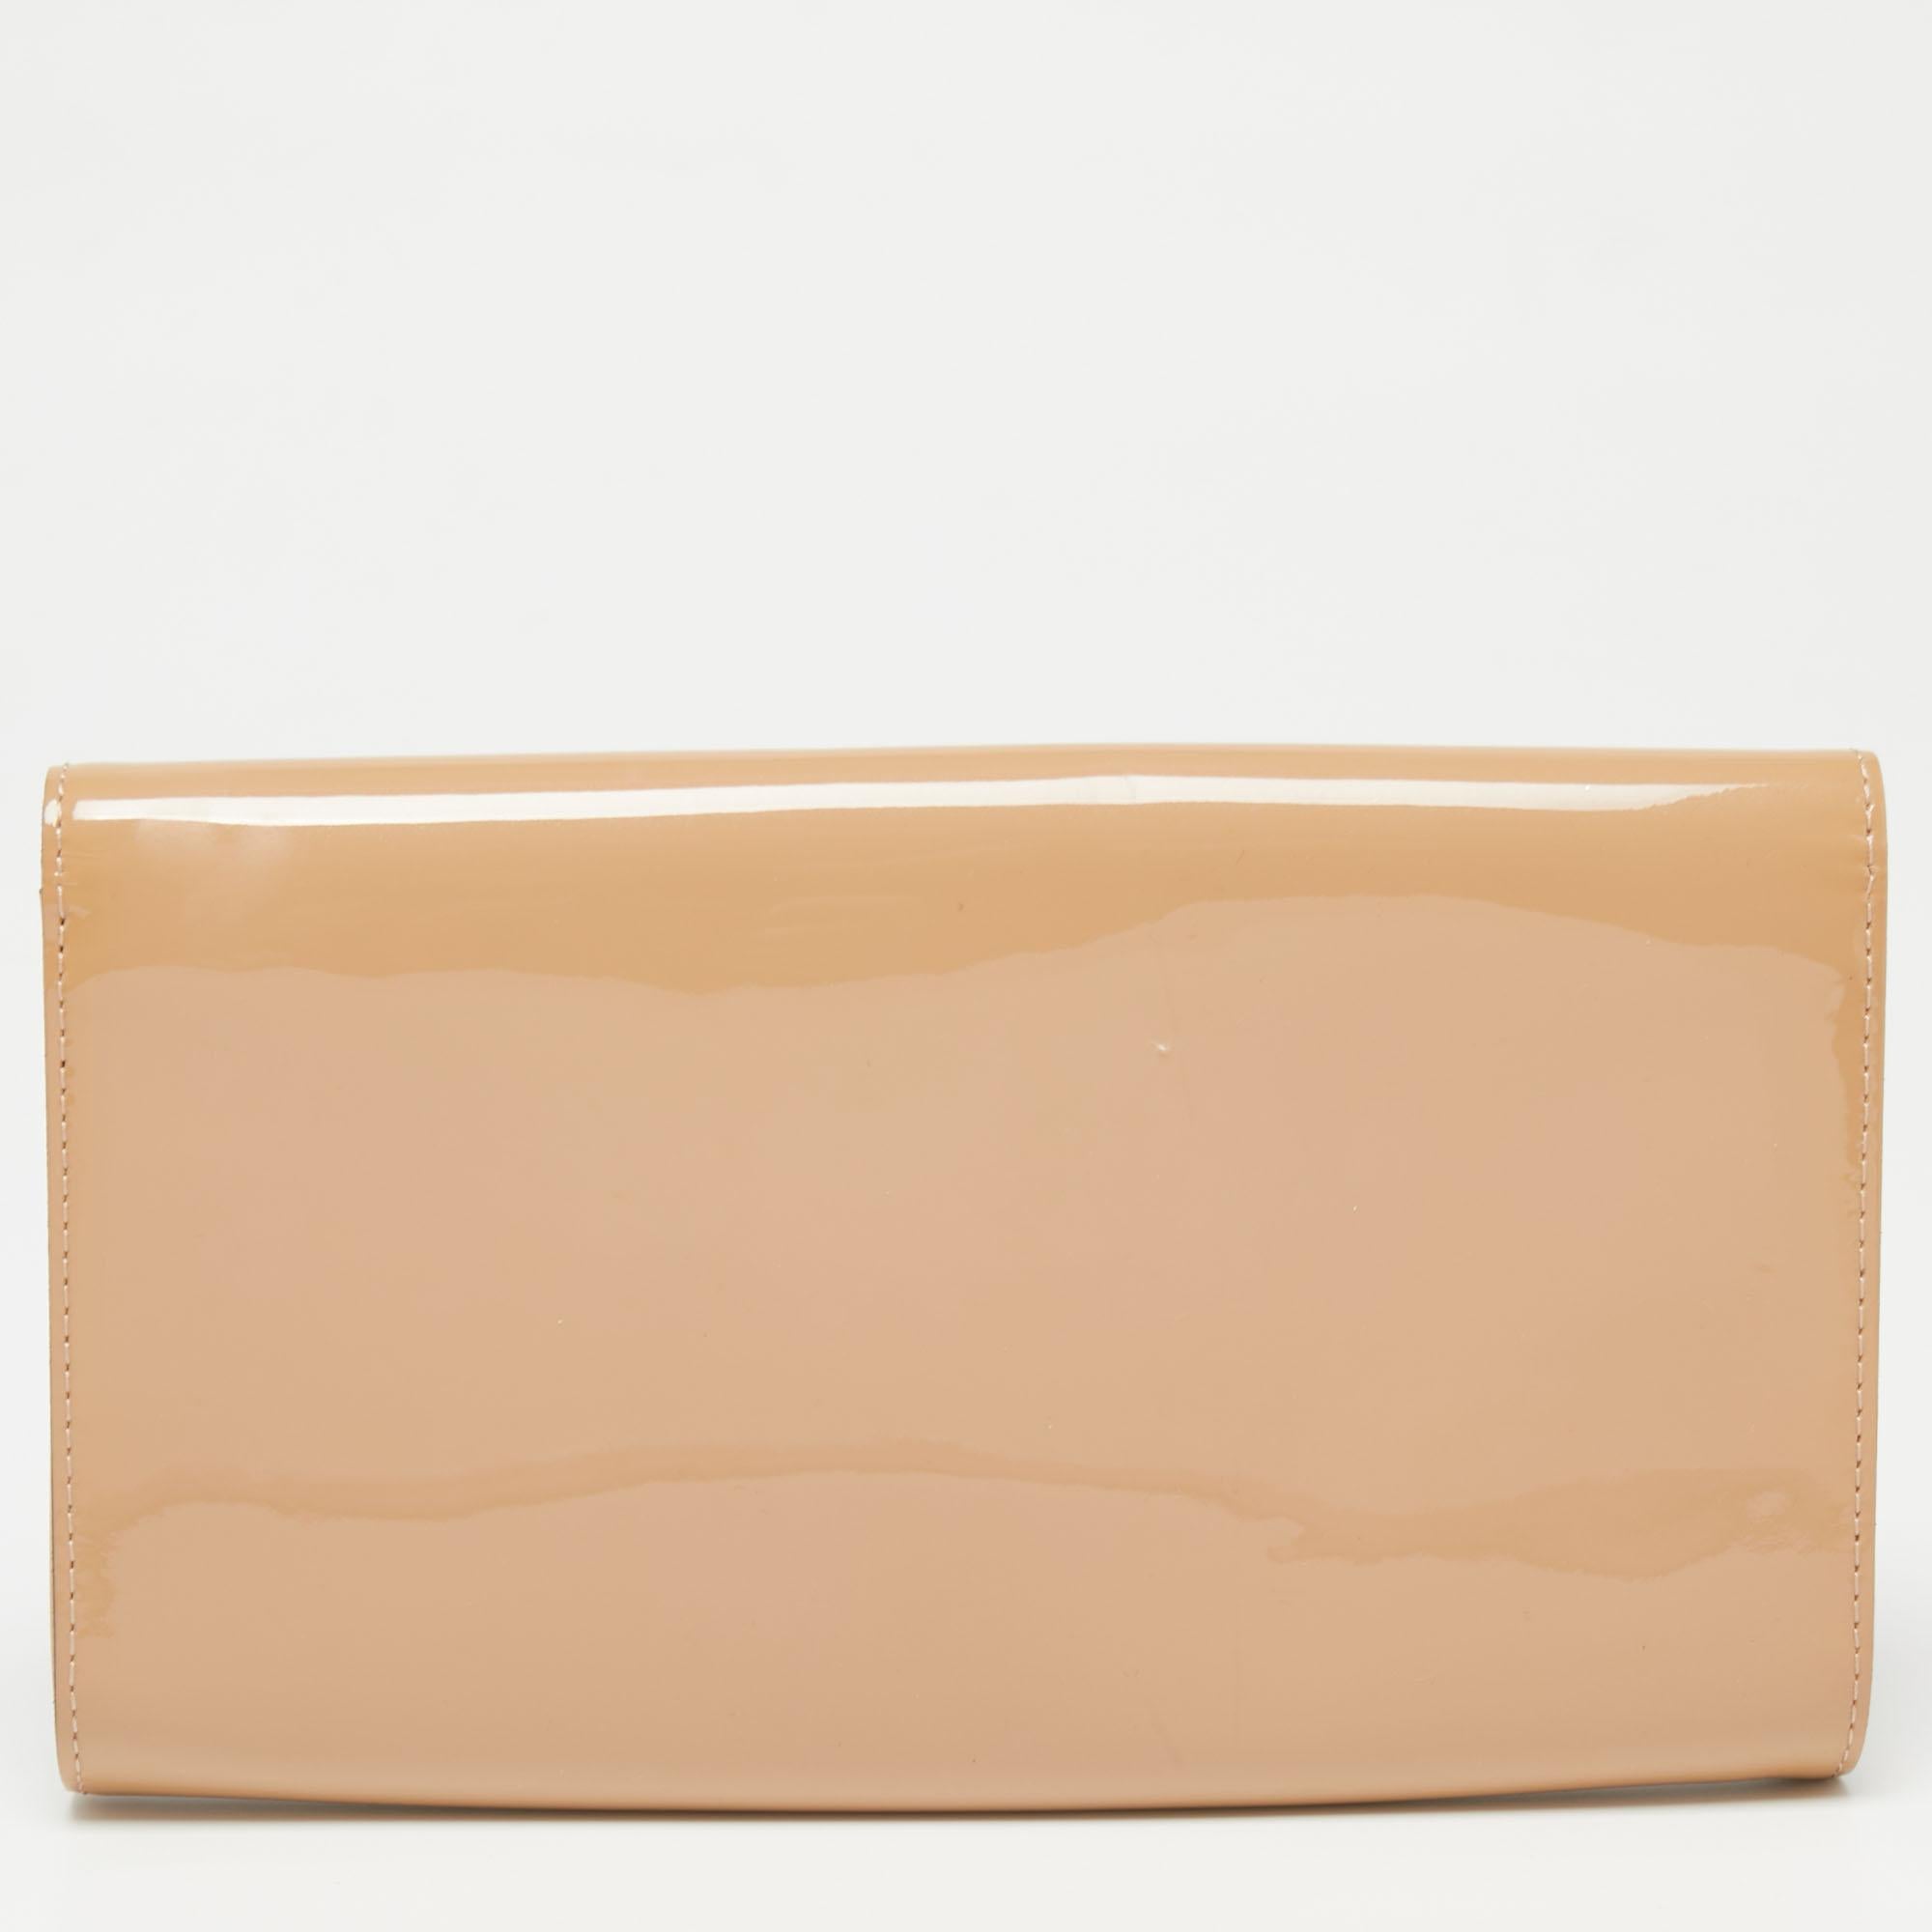 This beige Louise clutch by Louis Vuitton is well-crafted and overflowing with style. It has a glossy patent leather exterior, a fabric interior, and a large gold-tone 'LV' adorned on the flap. From the way it has been crafted to the way it has been